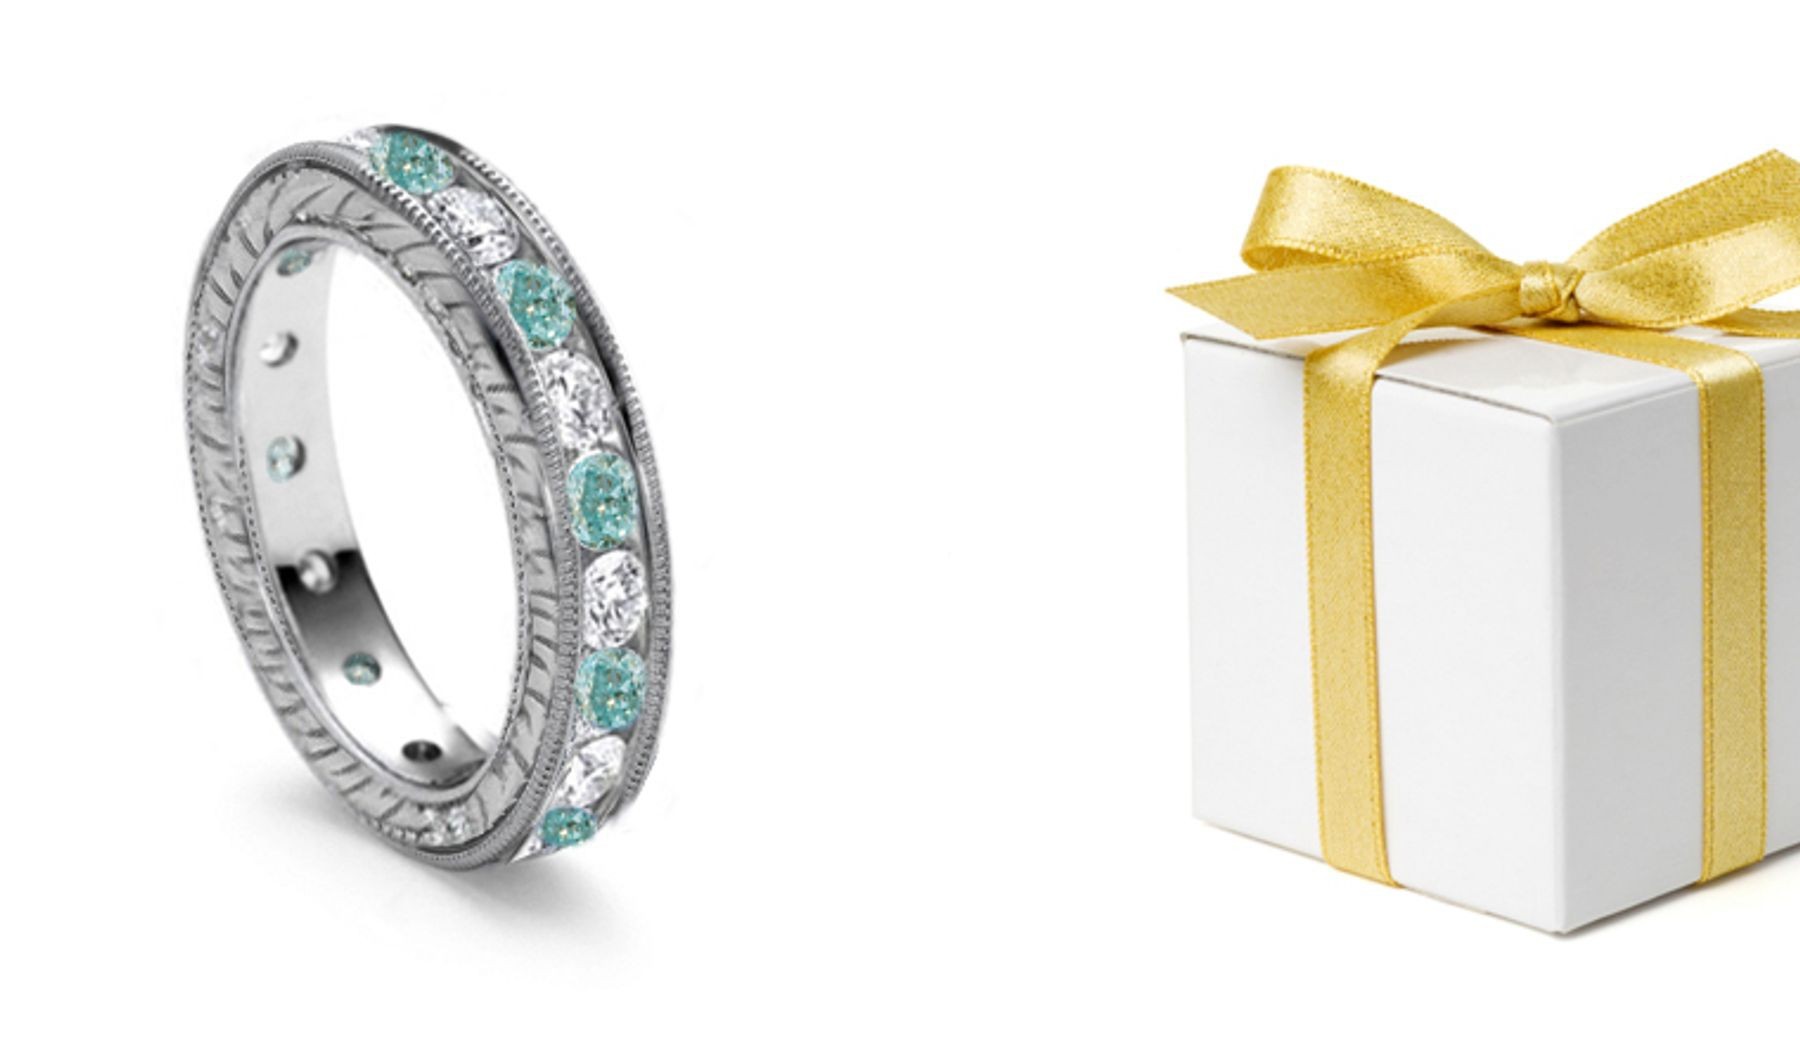 Pure Love: Endless Circle of White Green Diamonds Adorned with Fine Engraving on Band Sides